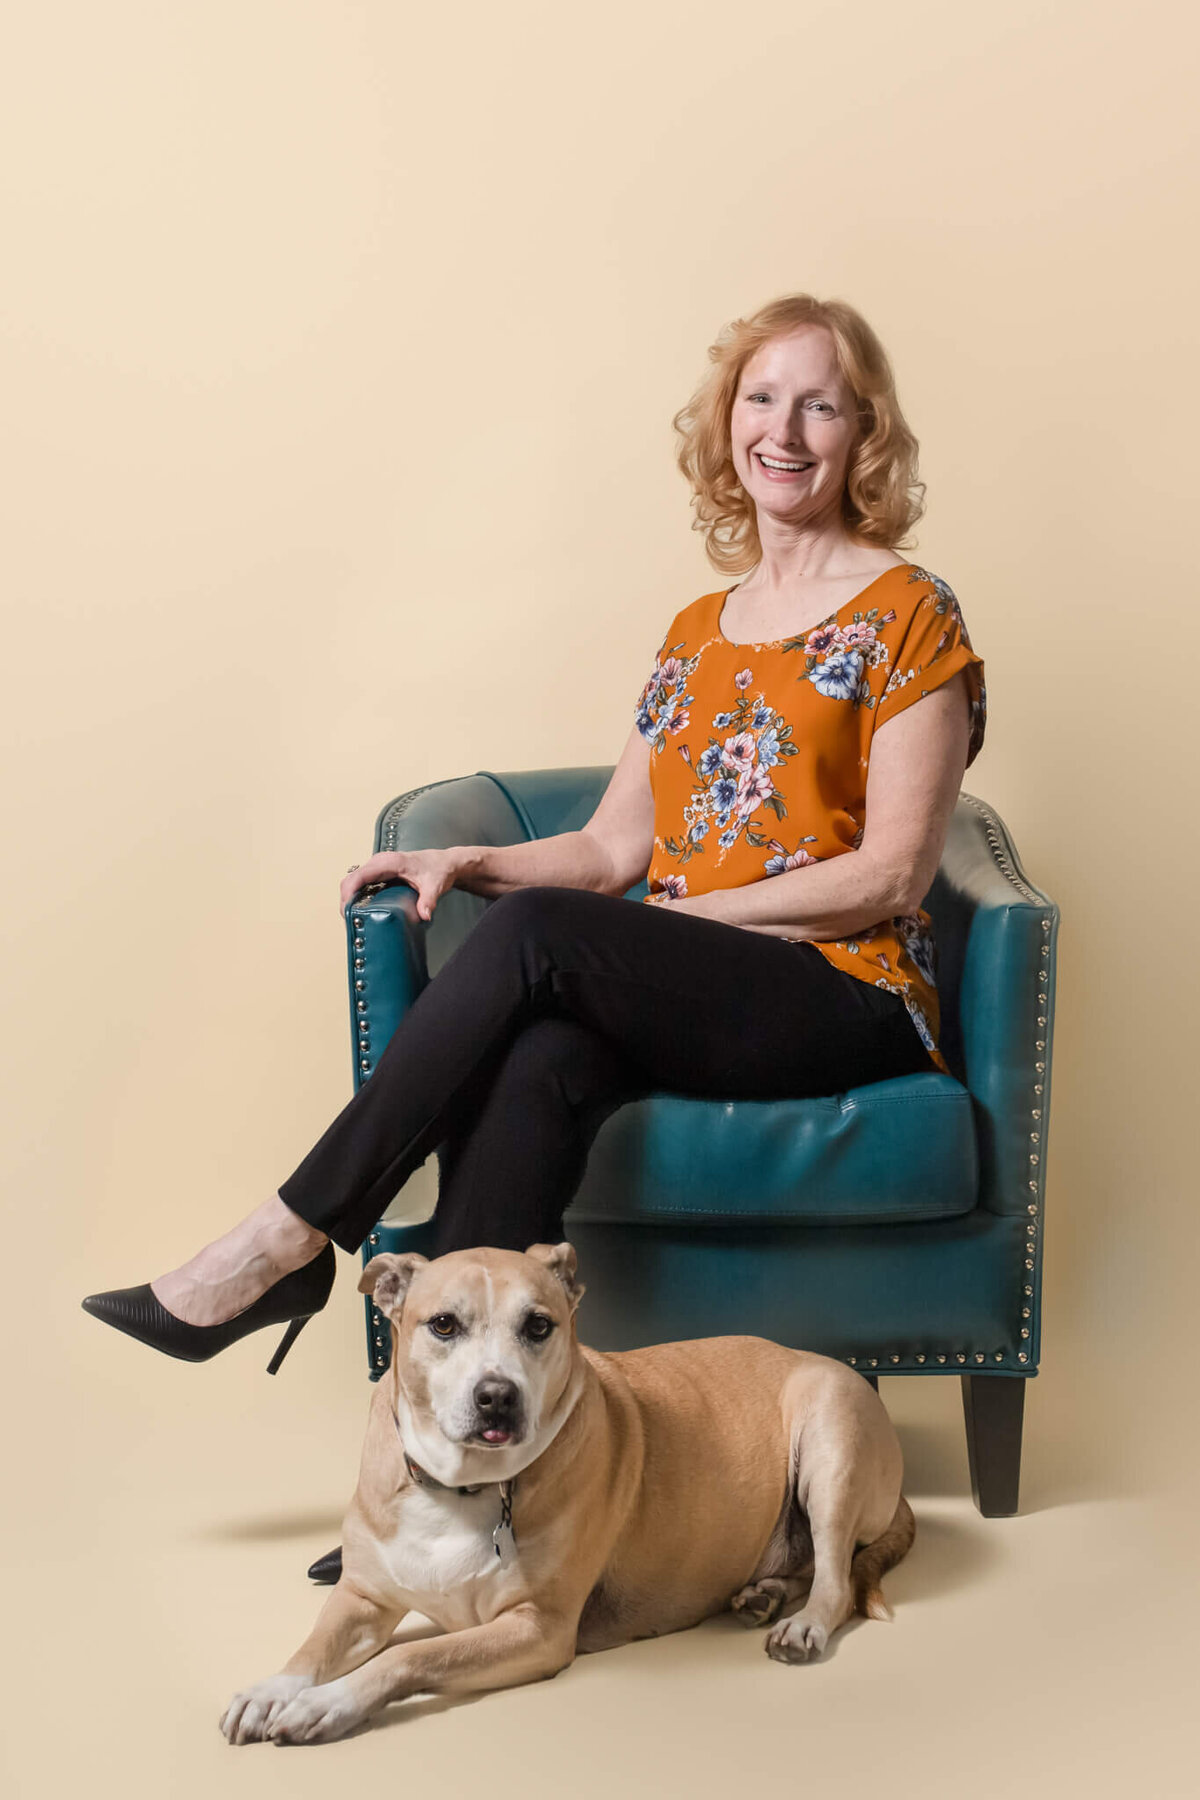 Senior end of life tan dog with his Human Mom sitting in a blue chair wearing an orange floral shirt